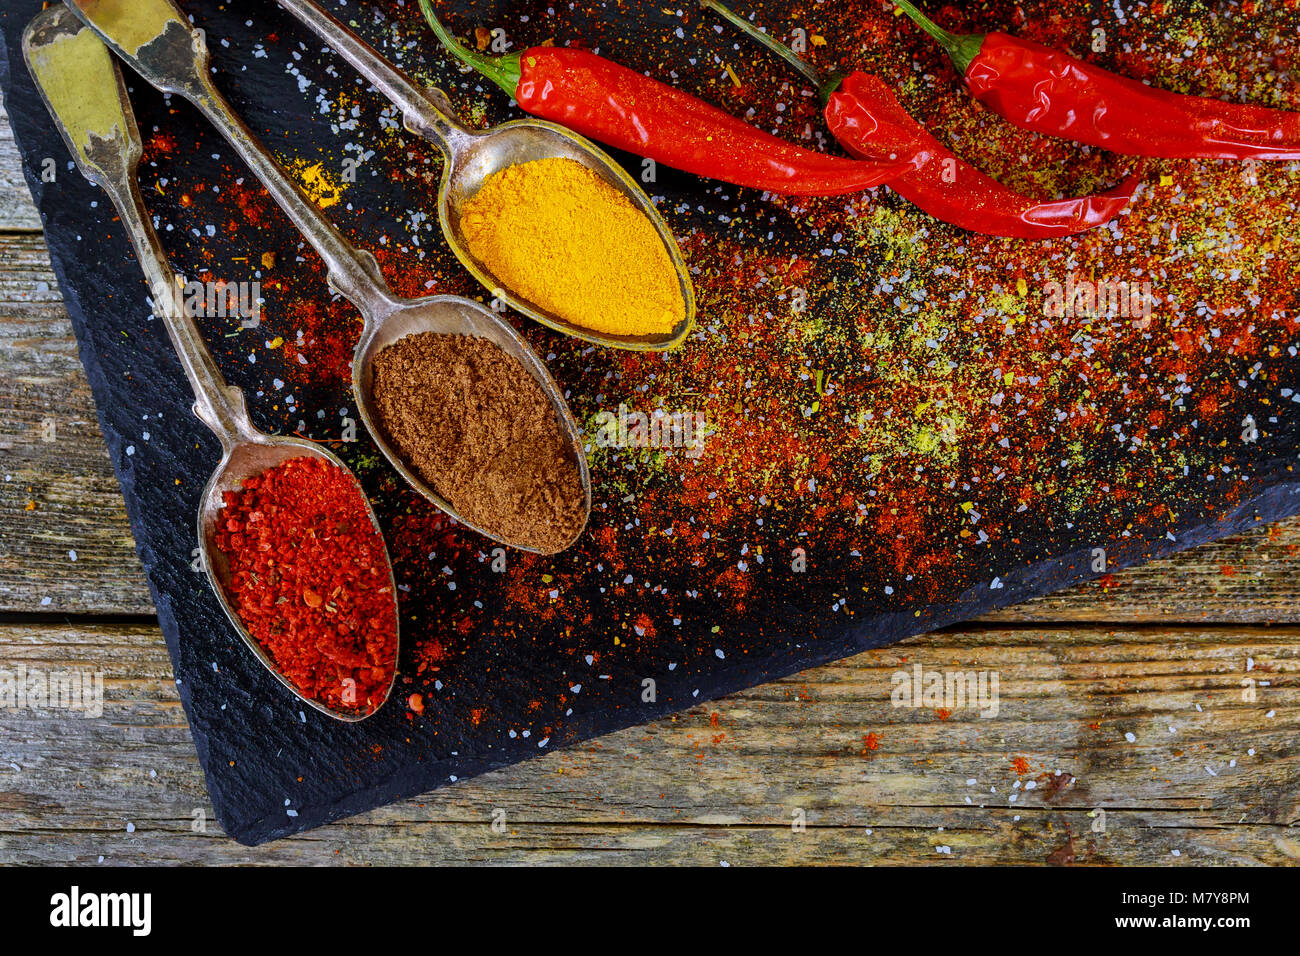 Overhead view depicting cooking with spices in a rustic kitchen with bowls of colourful ground spice and scattered powder on an old scored wooden coun Stock Photo